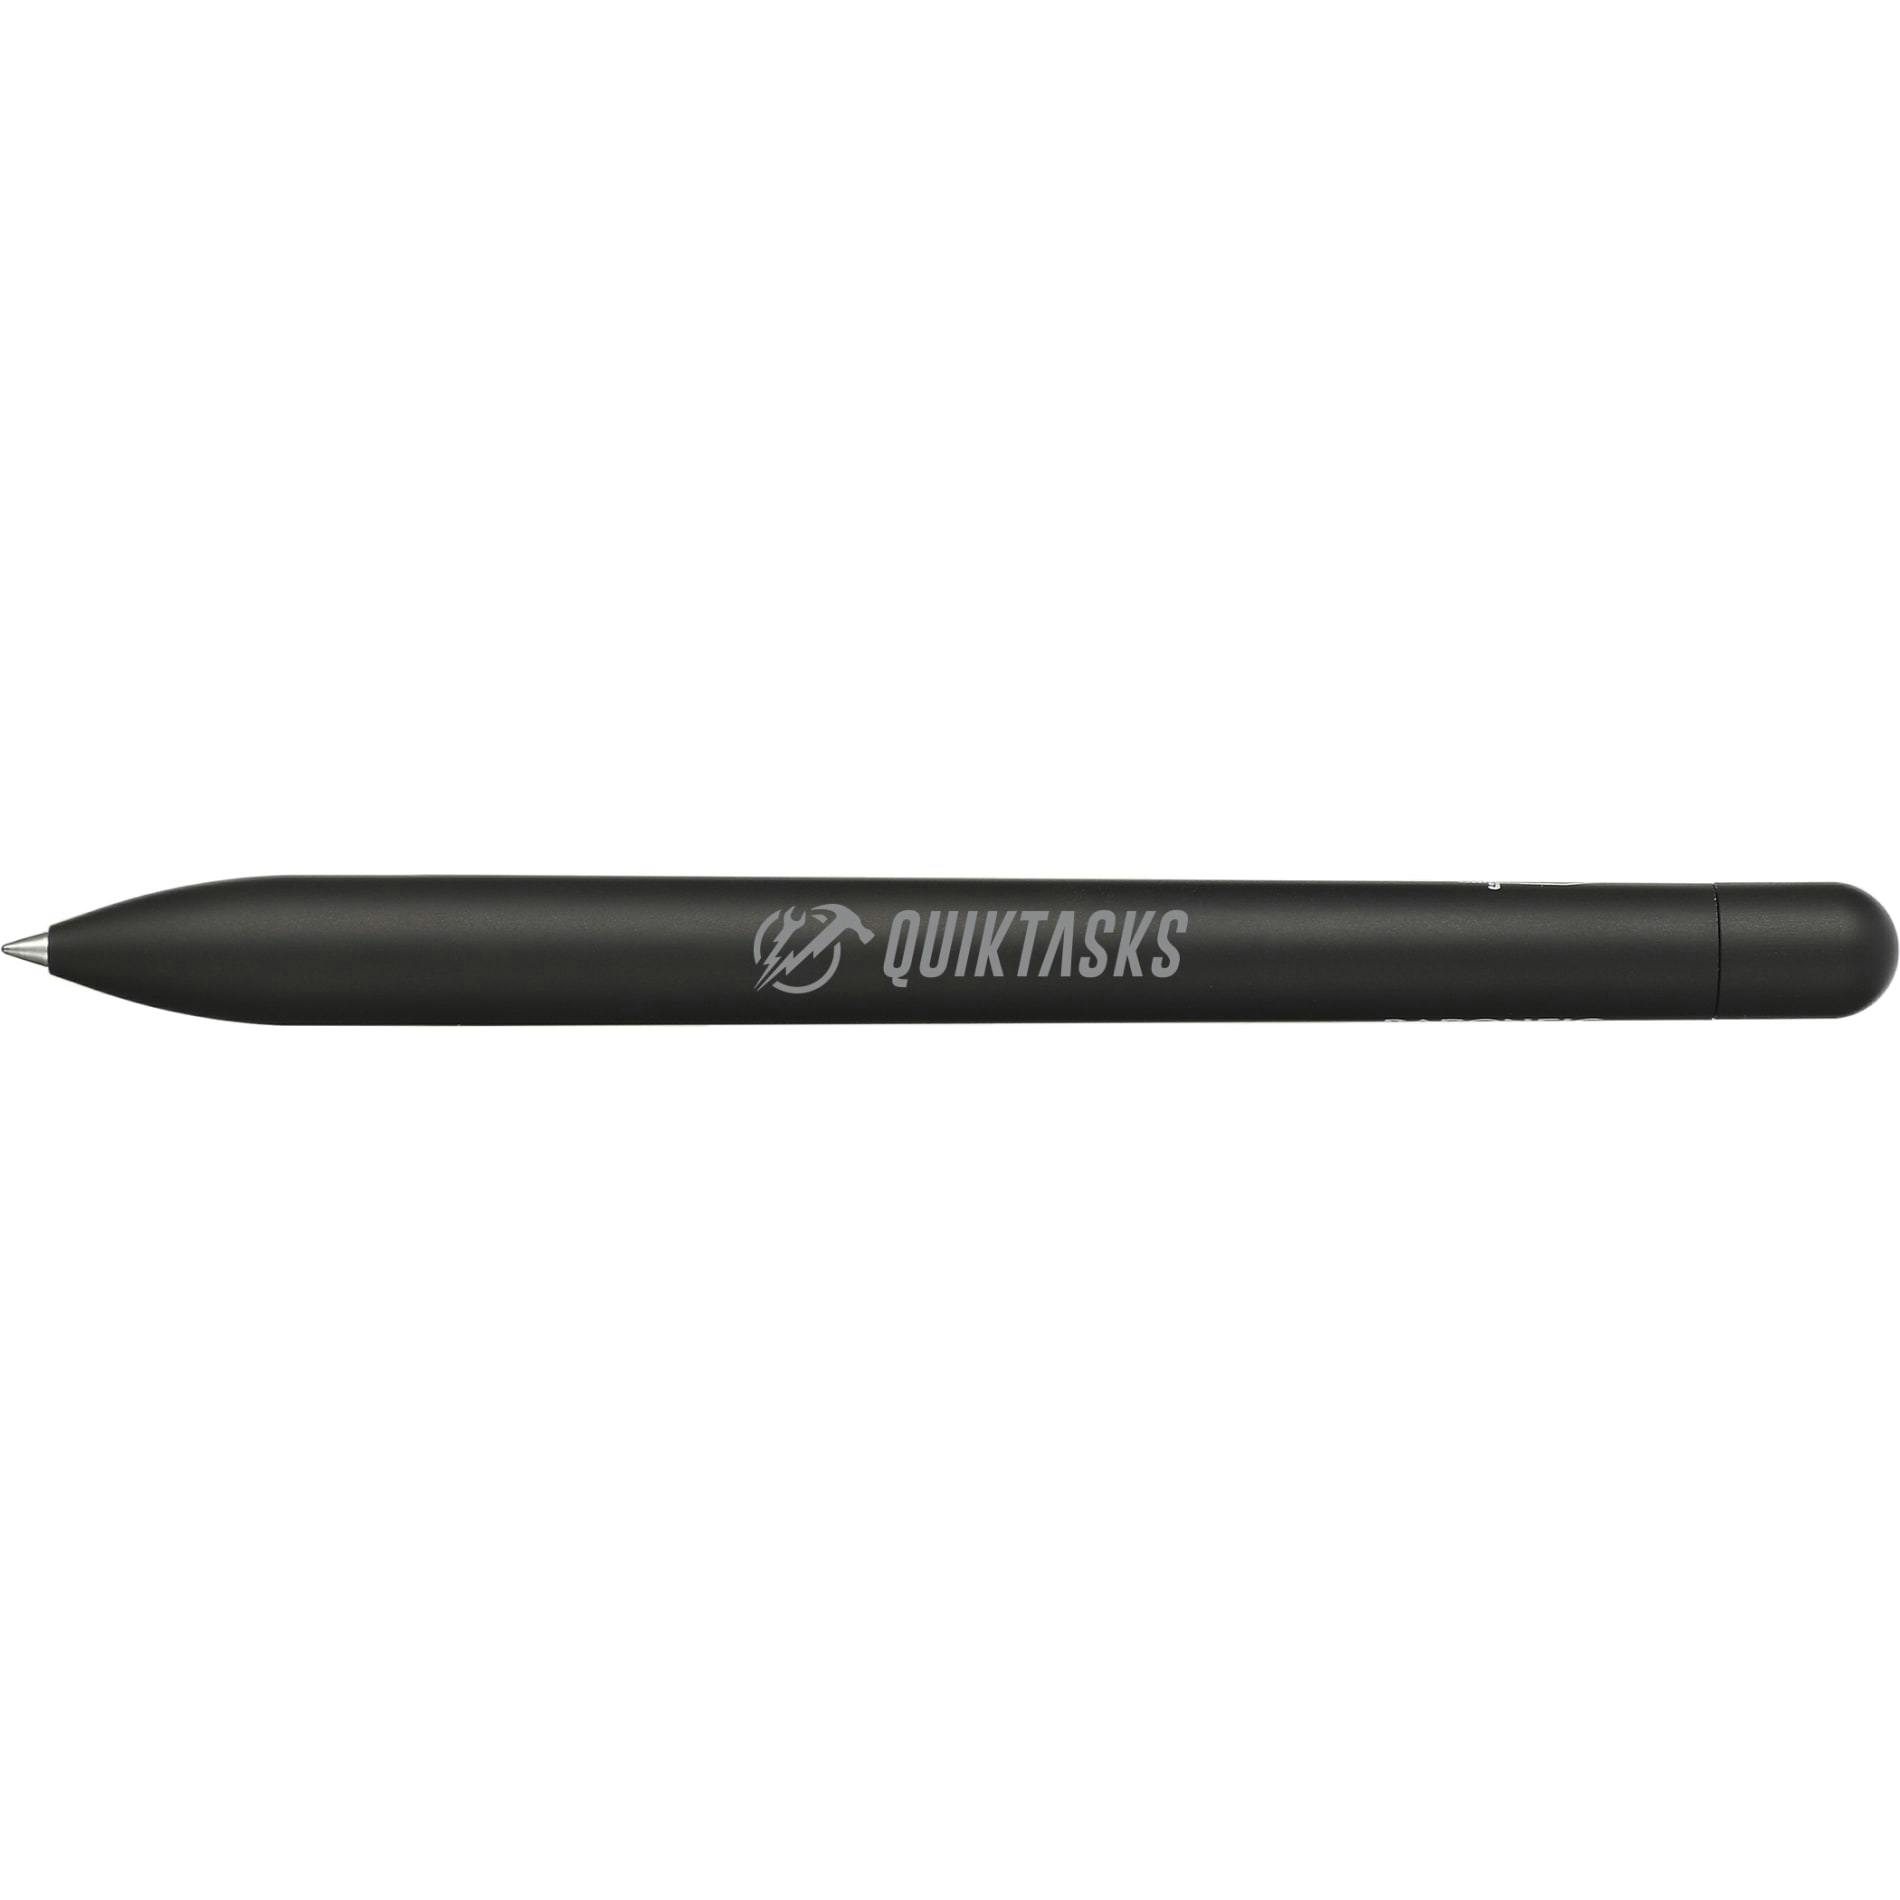 Baronfig Squire Pen - additional Image 1